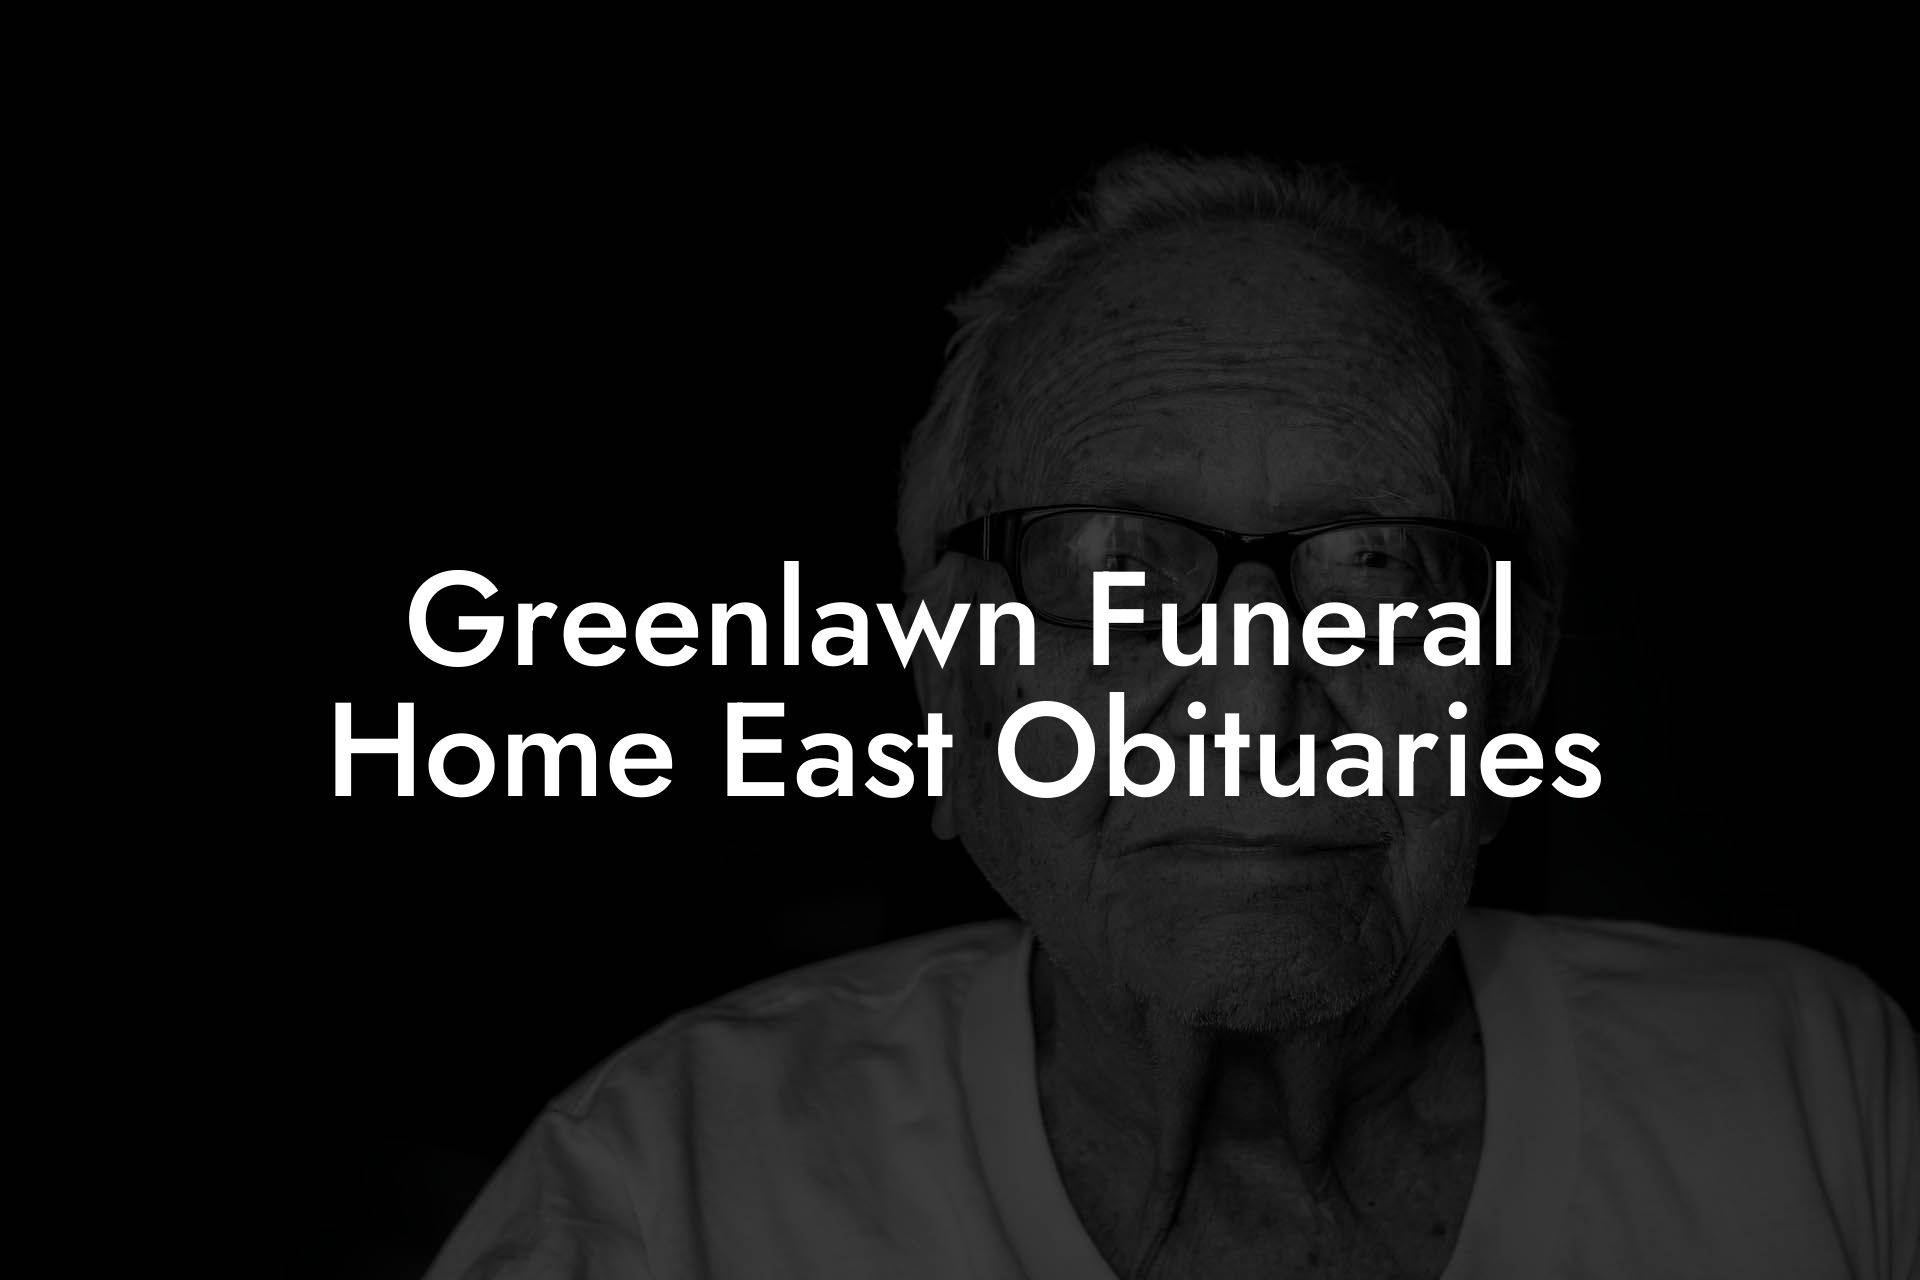 Greenlawn Funeral Home East Obituaries